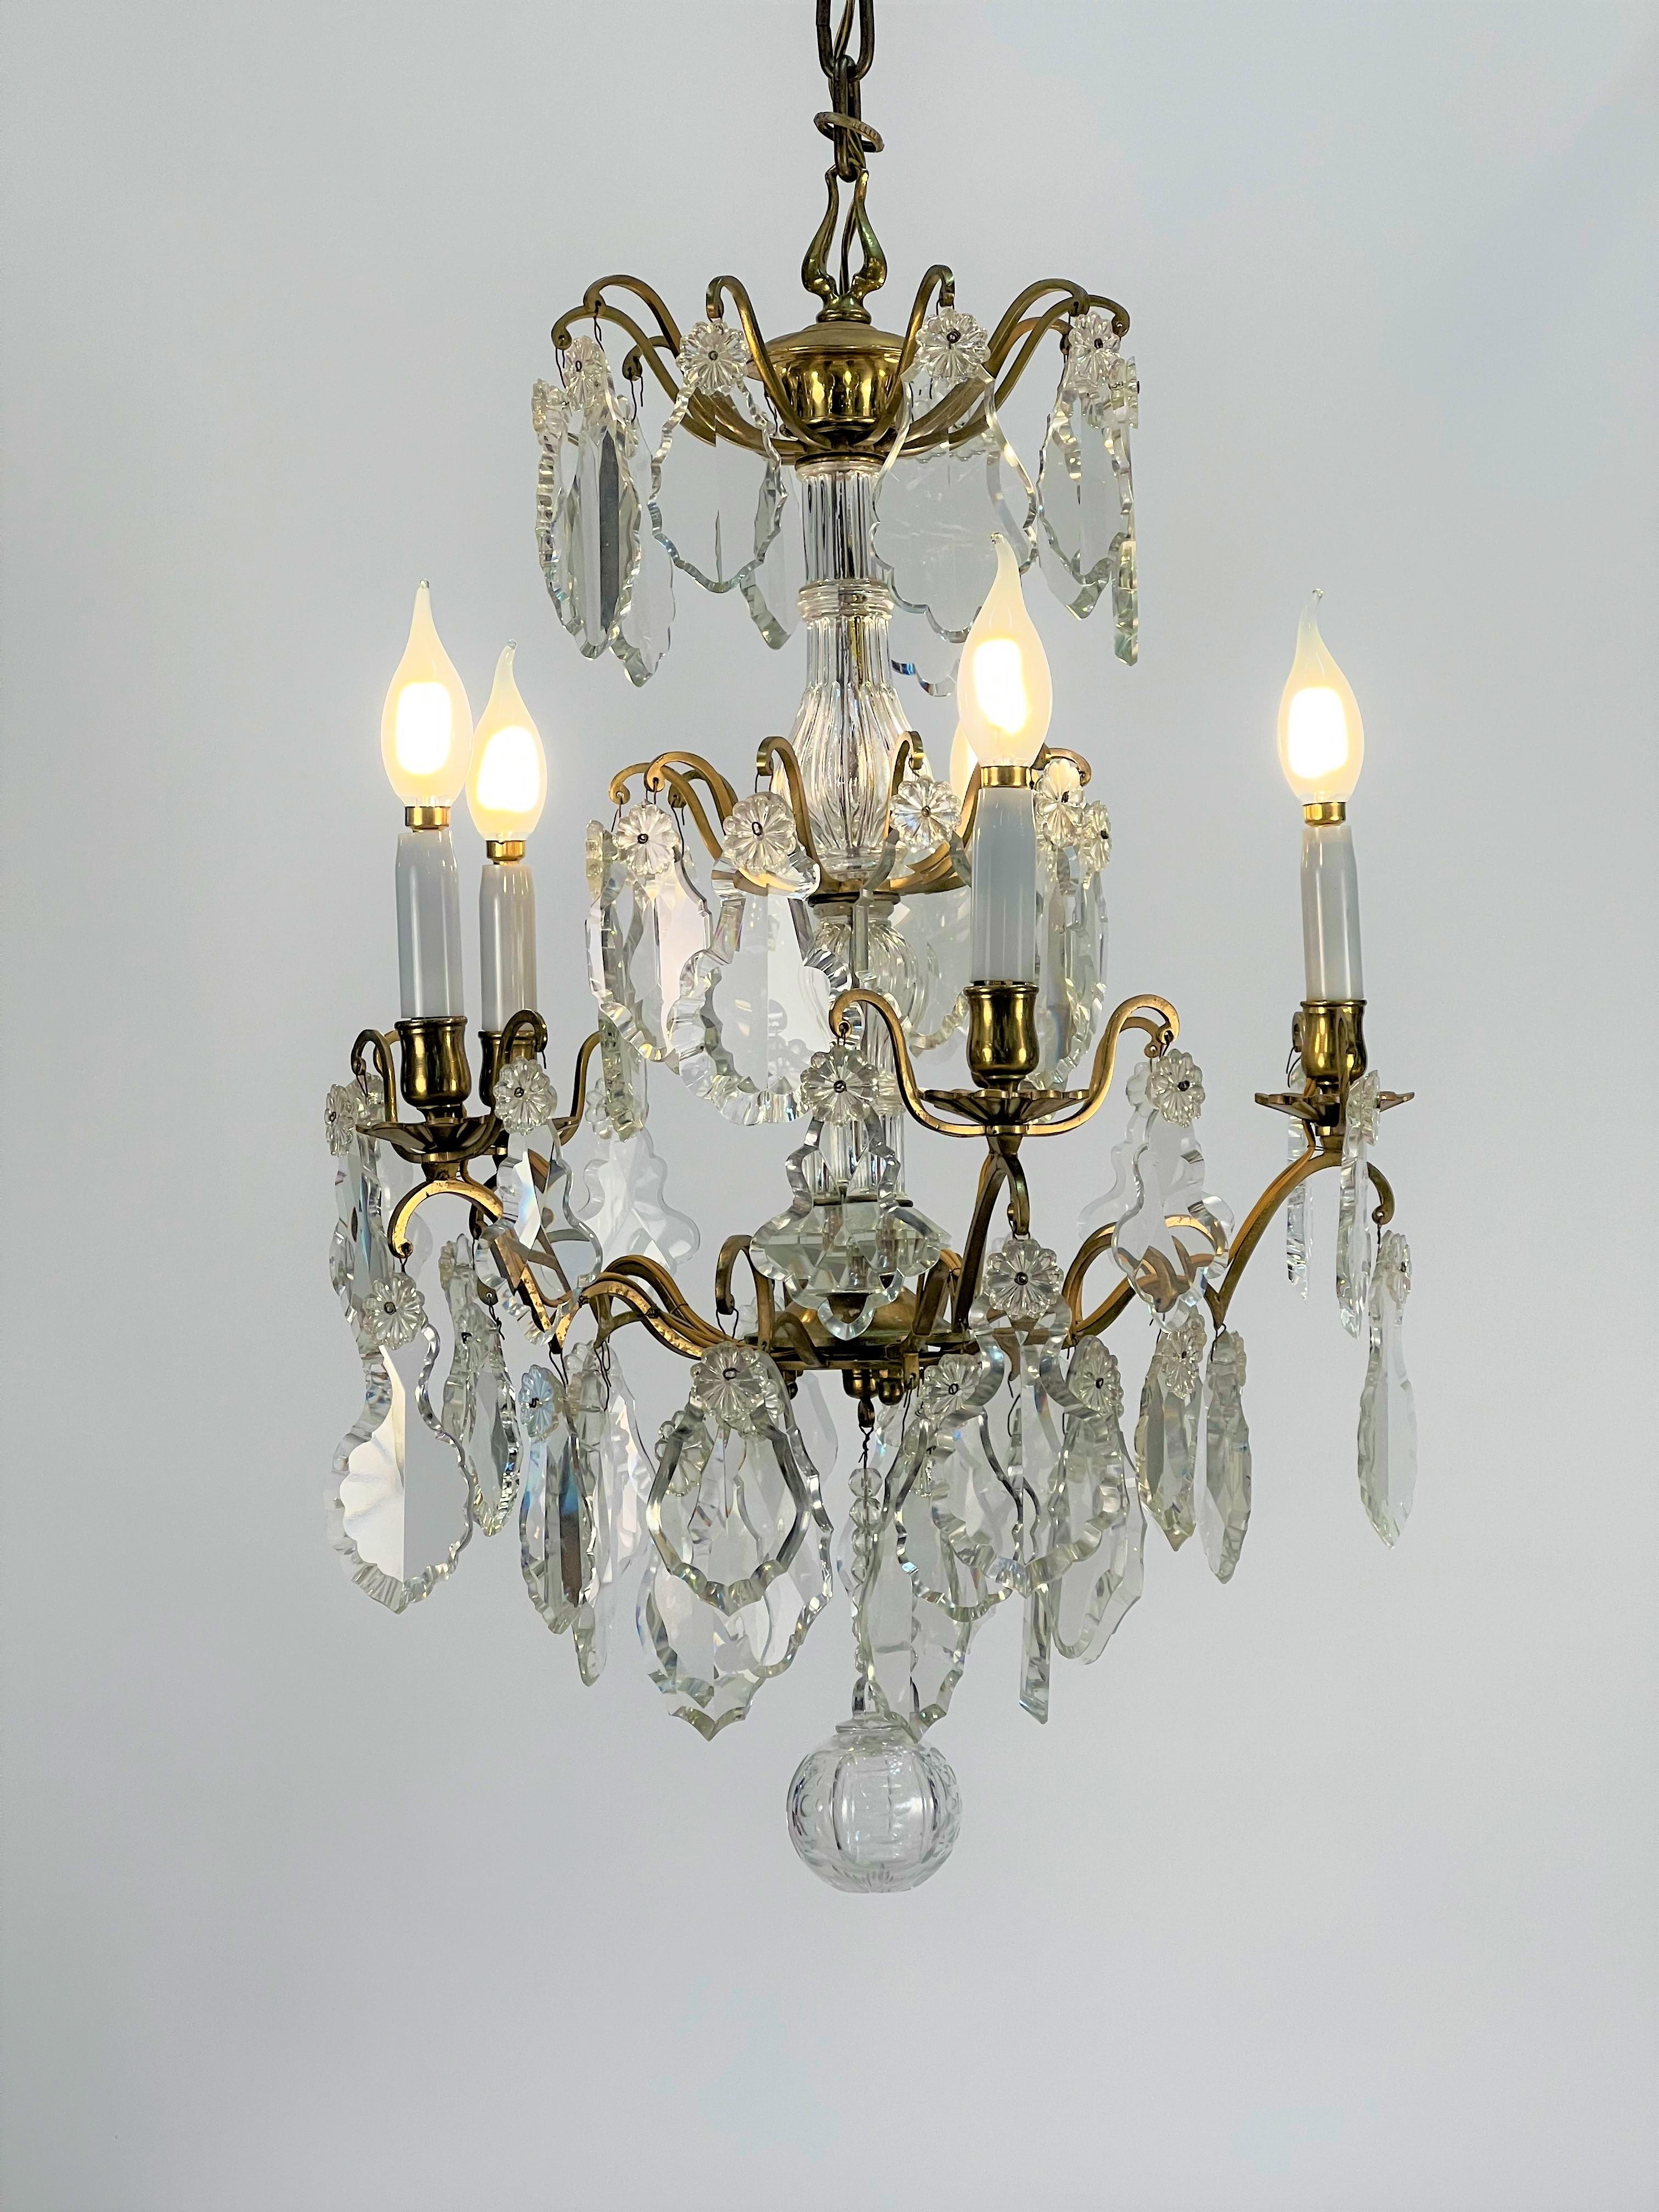 Late 19th century French bronze and crystal birdcage chandelier. Originally a candle chandelier that has been electrified by French wiring. Five US candle base sockets w/opal glass candle covers.